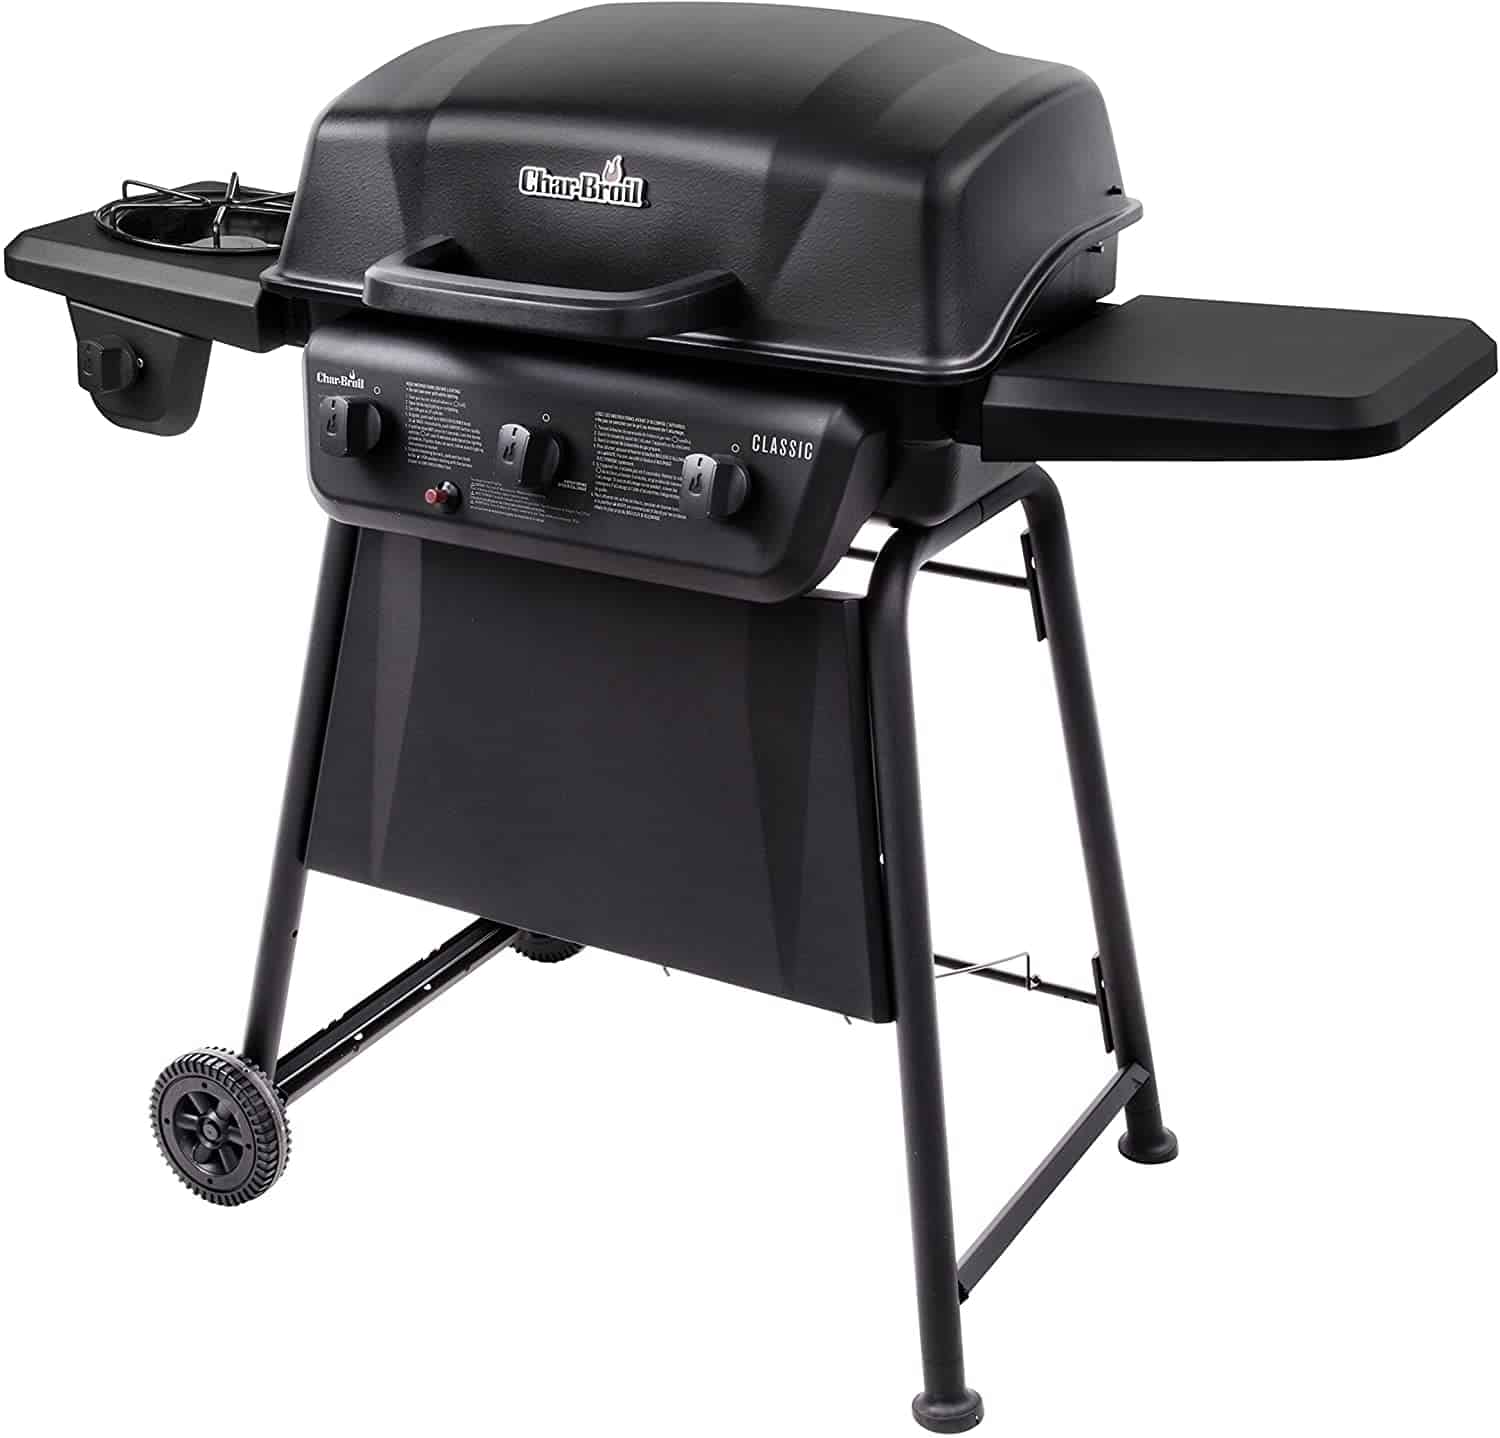 Best low-budget 3-burner gas grill- Char-Broil Classic 360